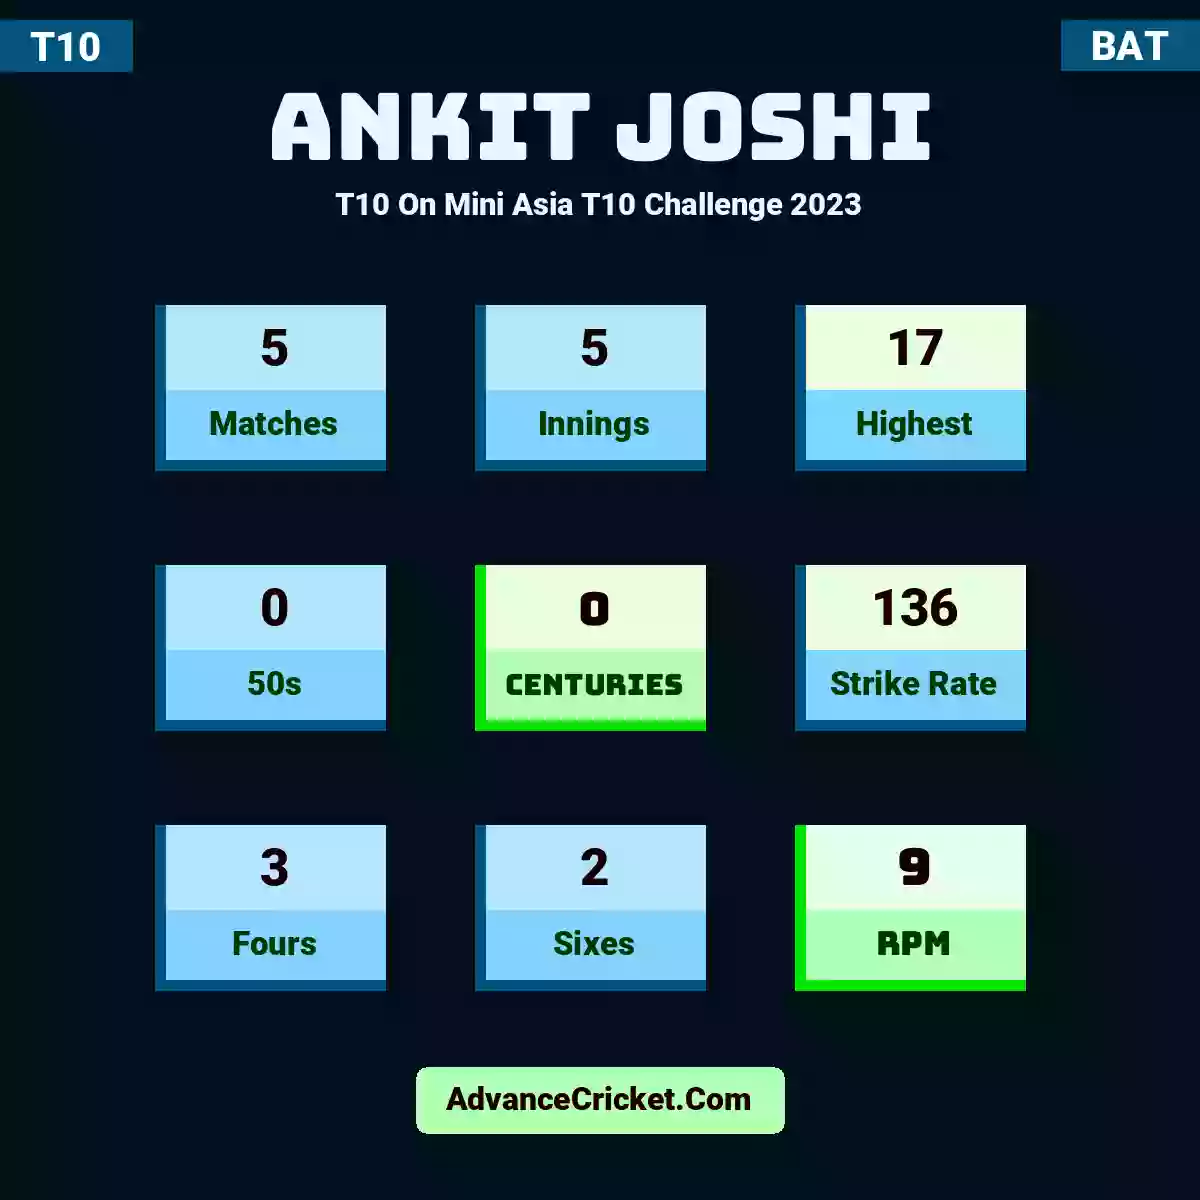 Ankit Joshi T10  On Mini Asia T10 Challenge 2023, Ankit Joshi played 5 matches, scored 17 runs as highest, 0 half-centuries, and 0 centuries, with a strike rate of 136. A.Joshi hit 3 fours and 2 sixes, with an RPM of 9.